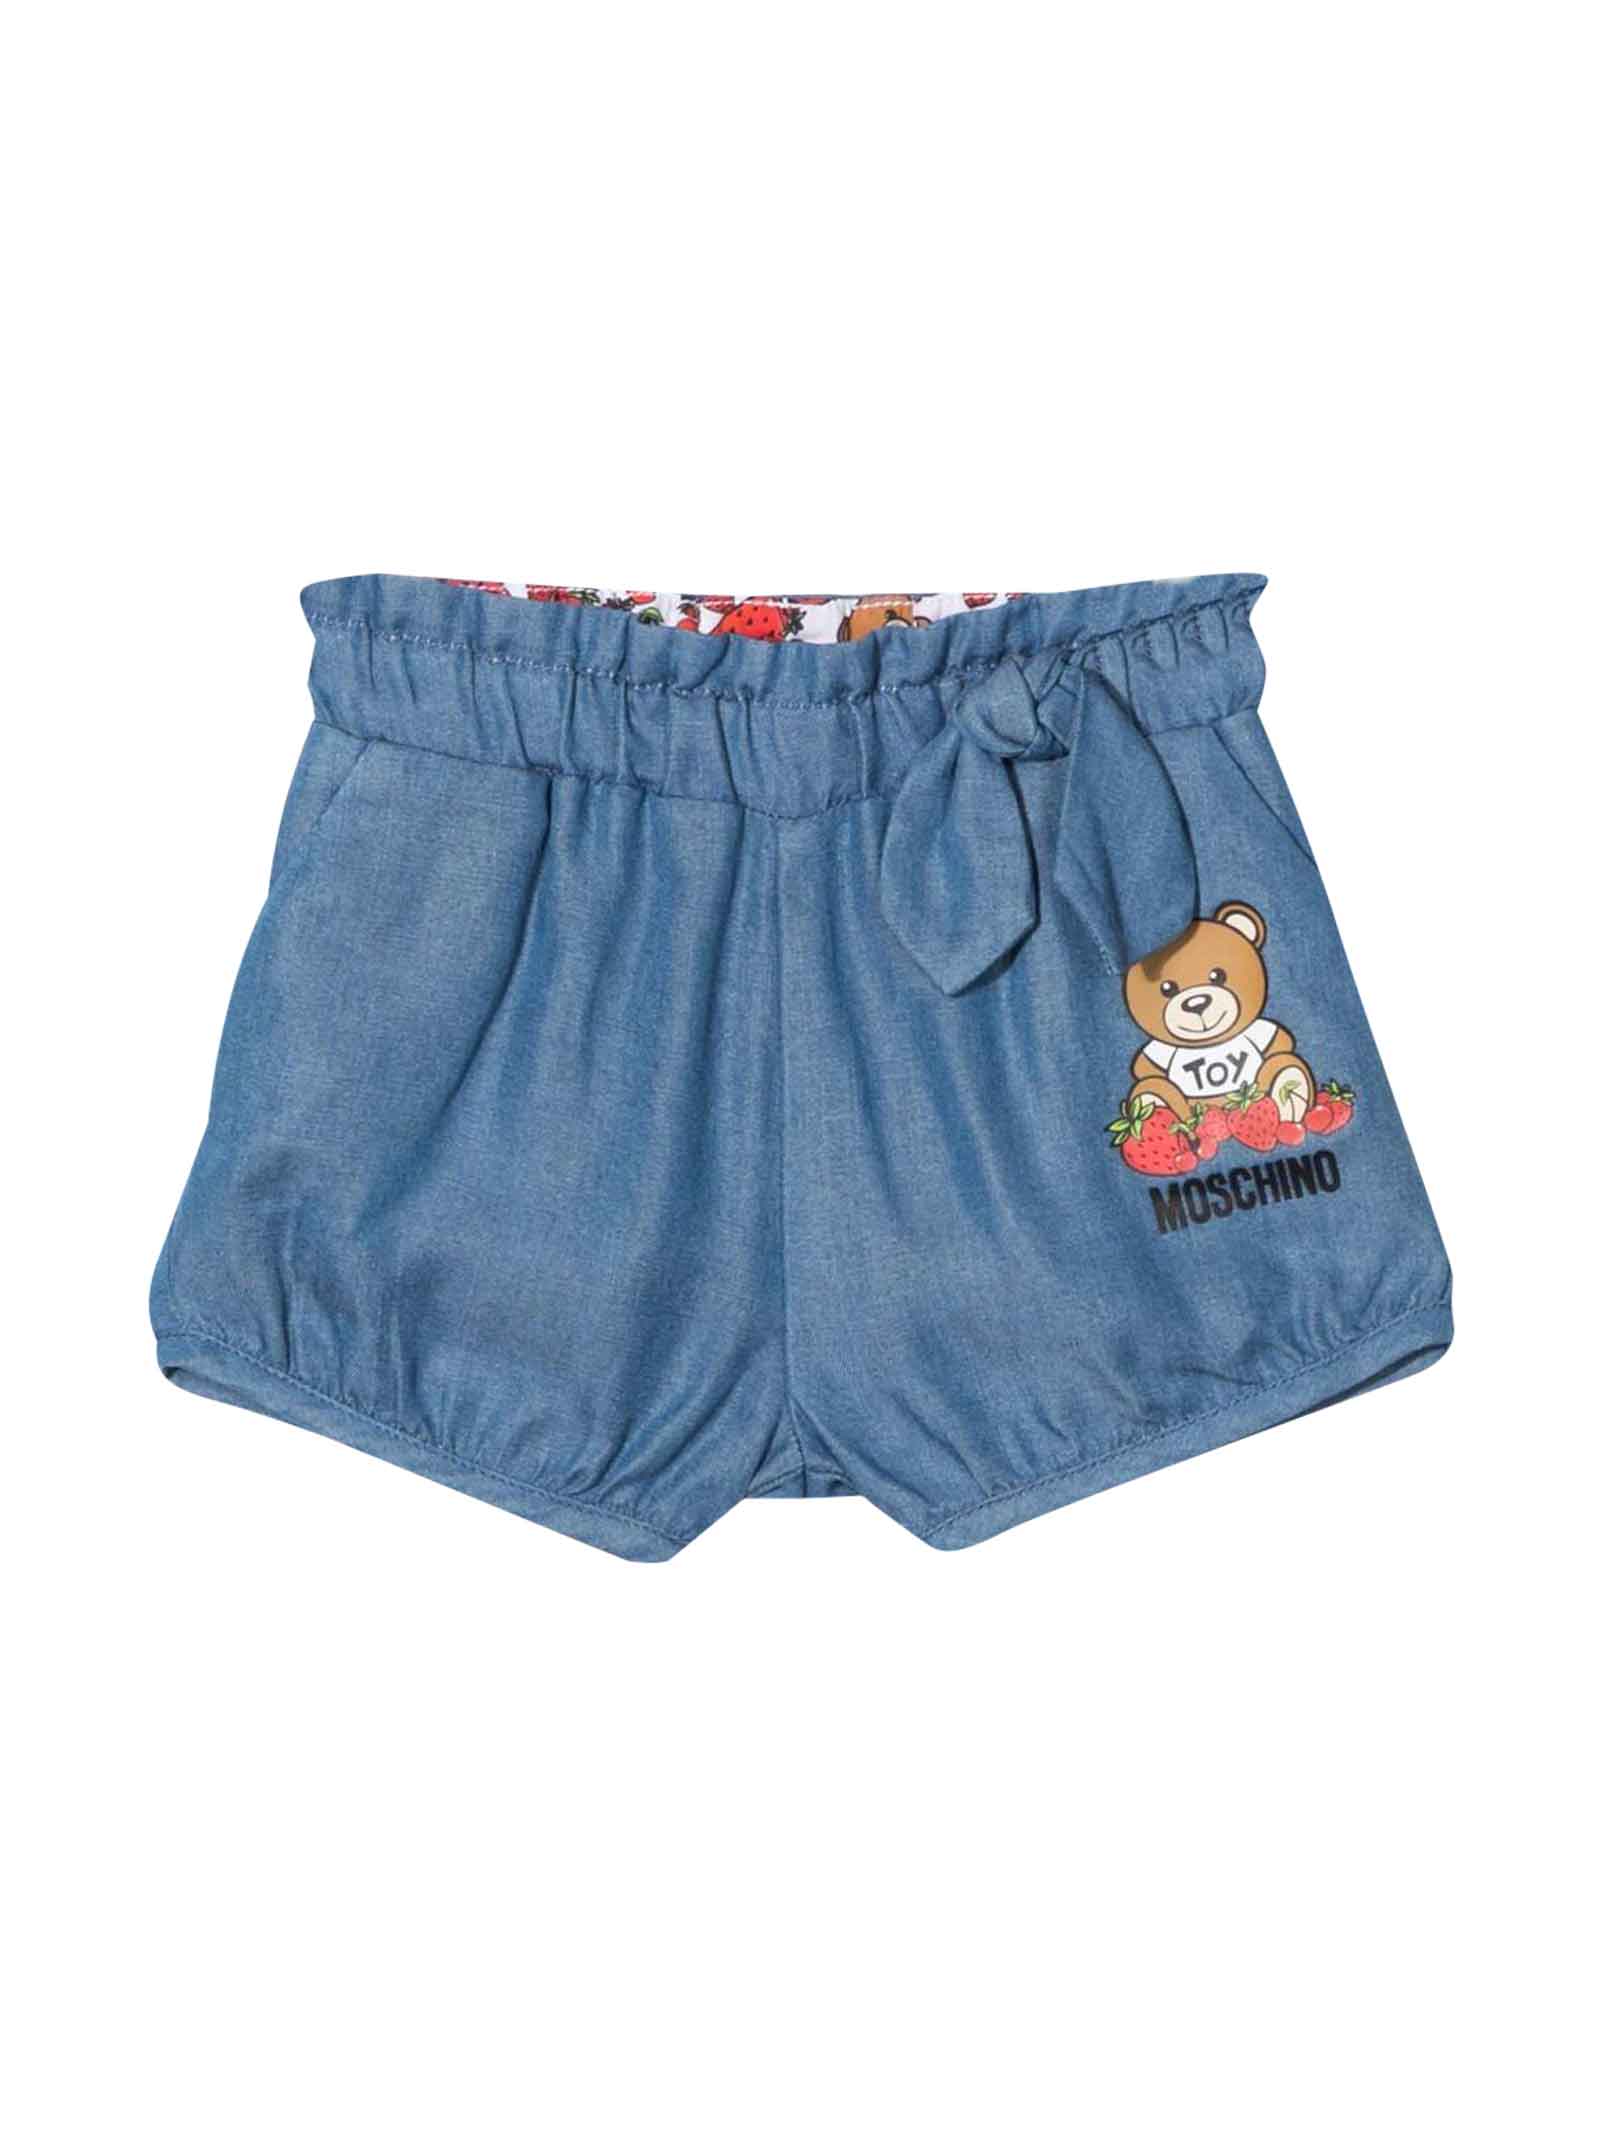 Moschino Baby Girl Denim Shorts, With Teddy Bear Print, Waist With Elasticated Drawstring, Two Side Bellows Pockets And Elasticated Hem By.